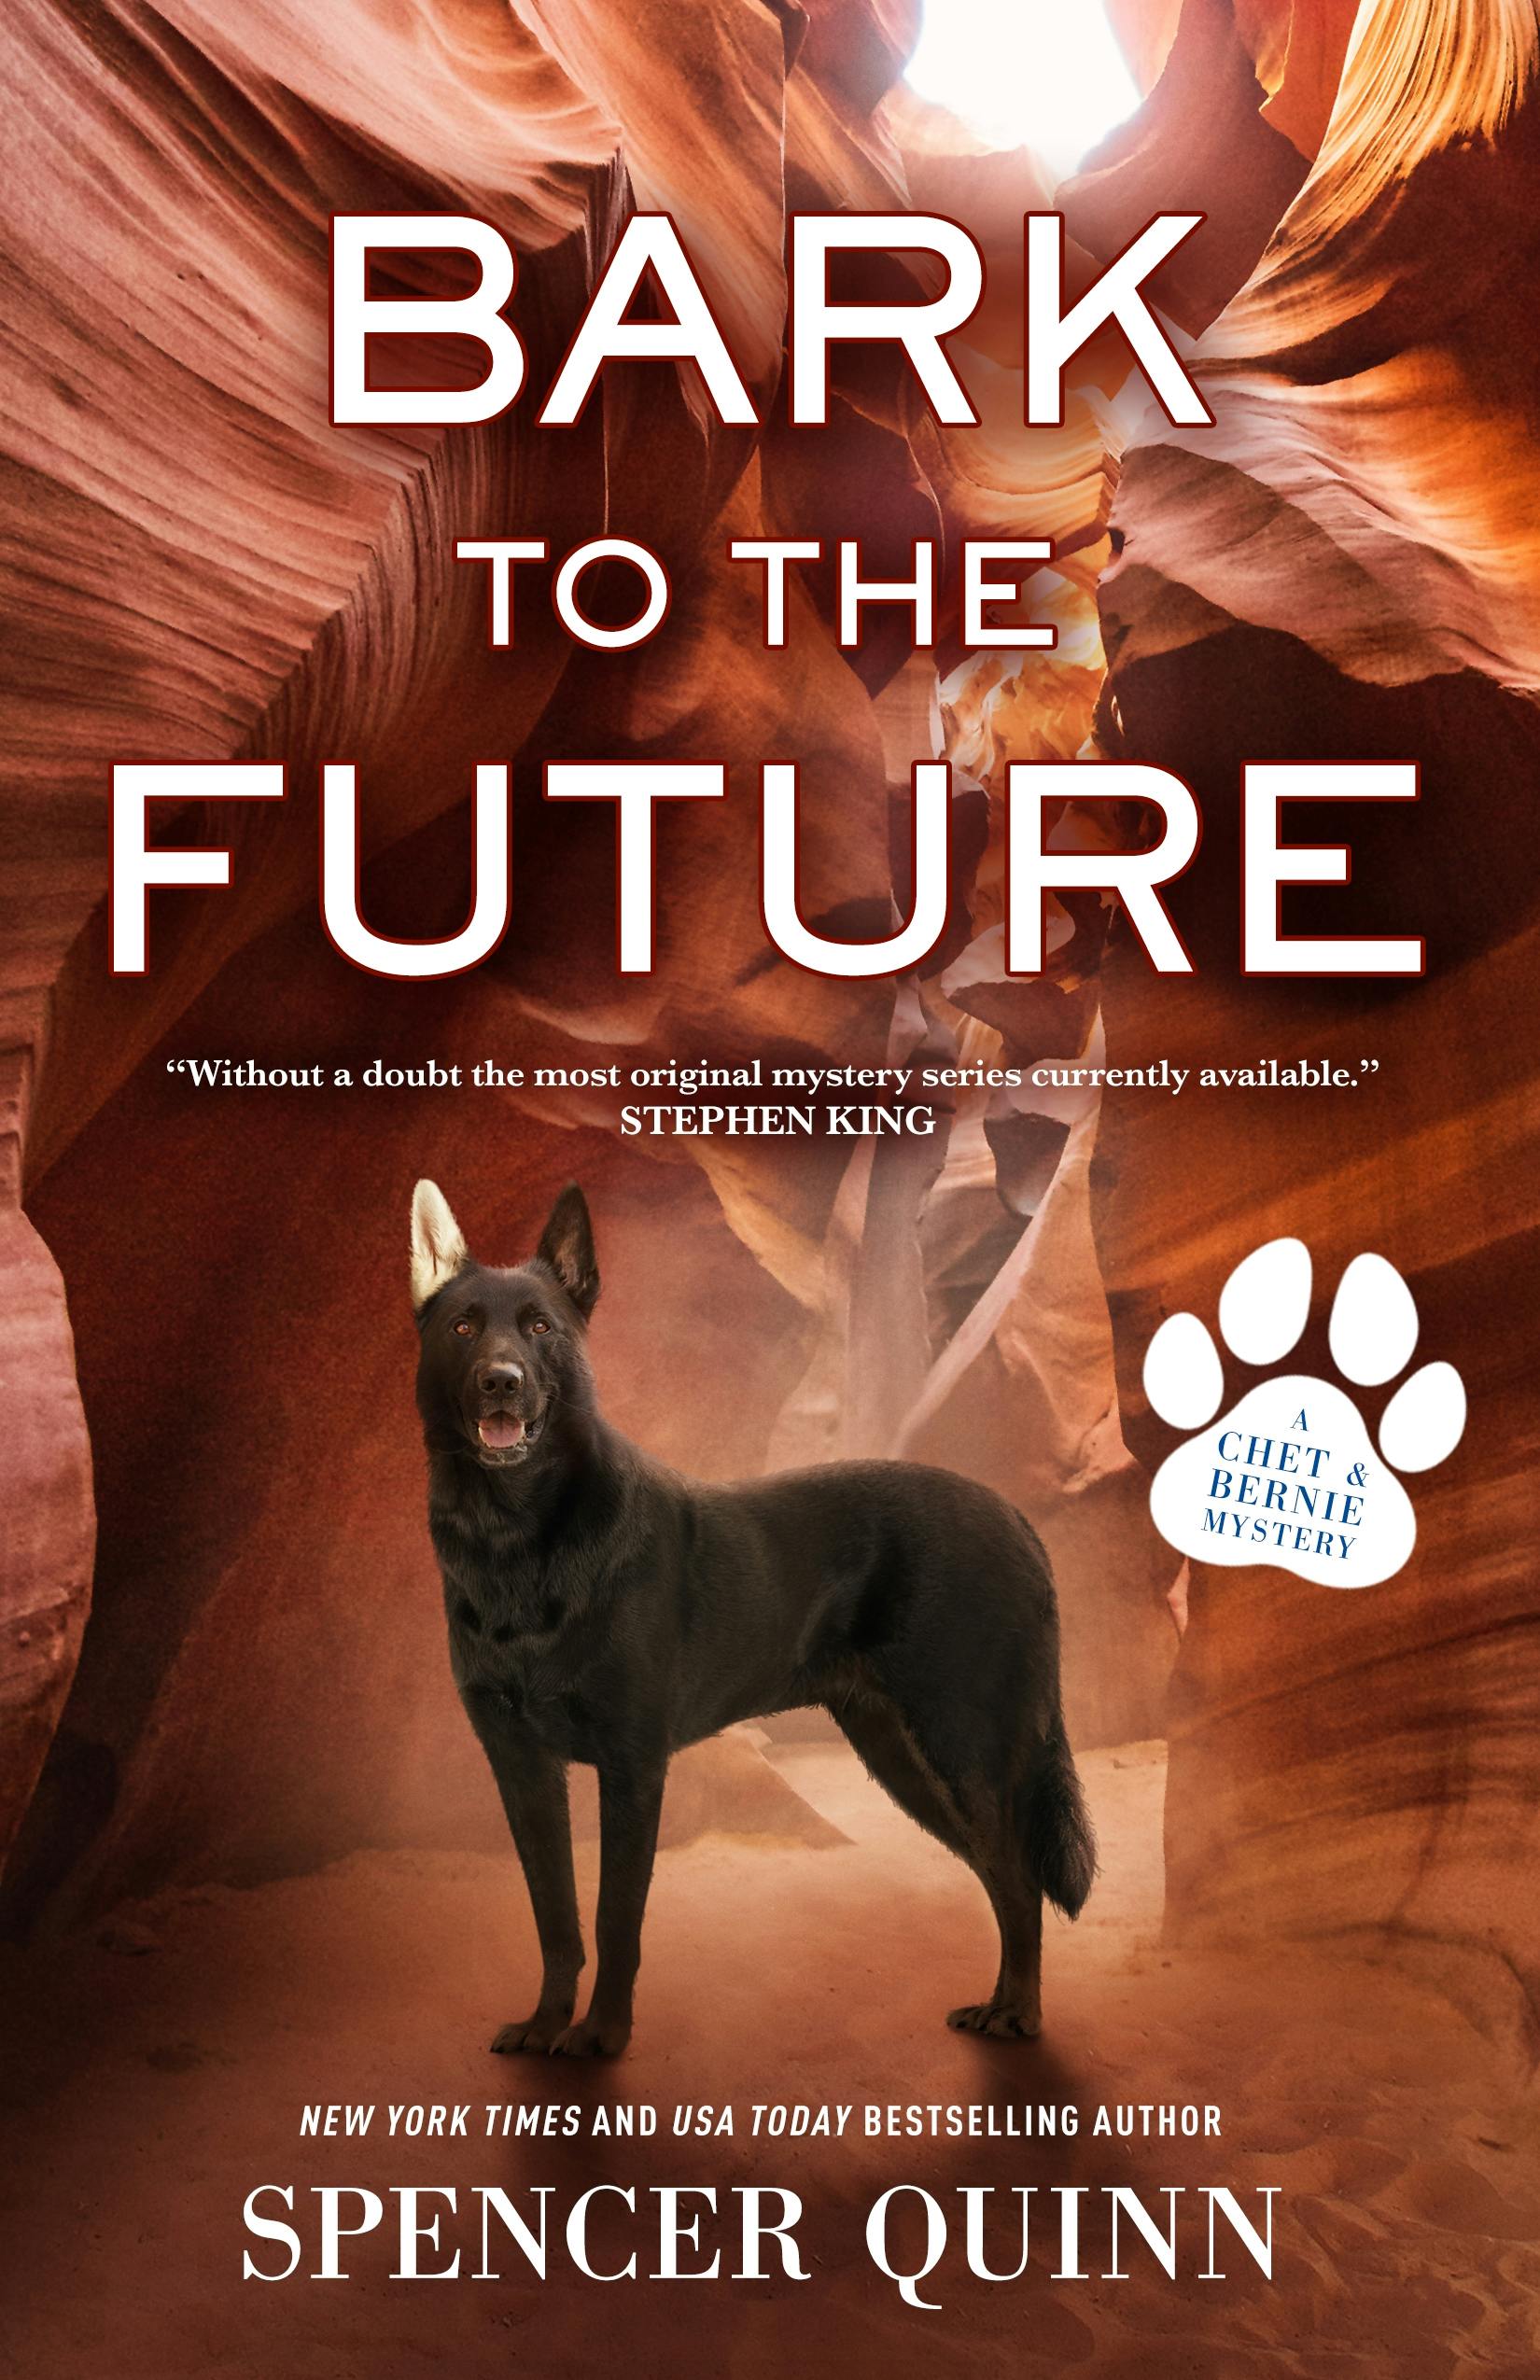 Cover for the book titled as: Bark to the Future